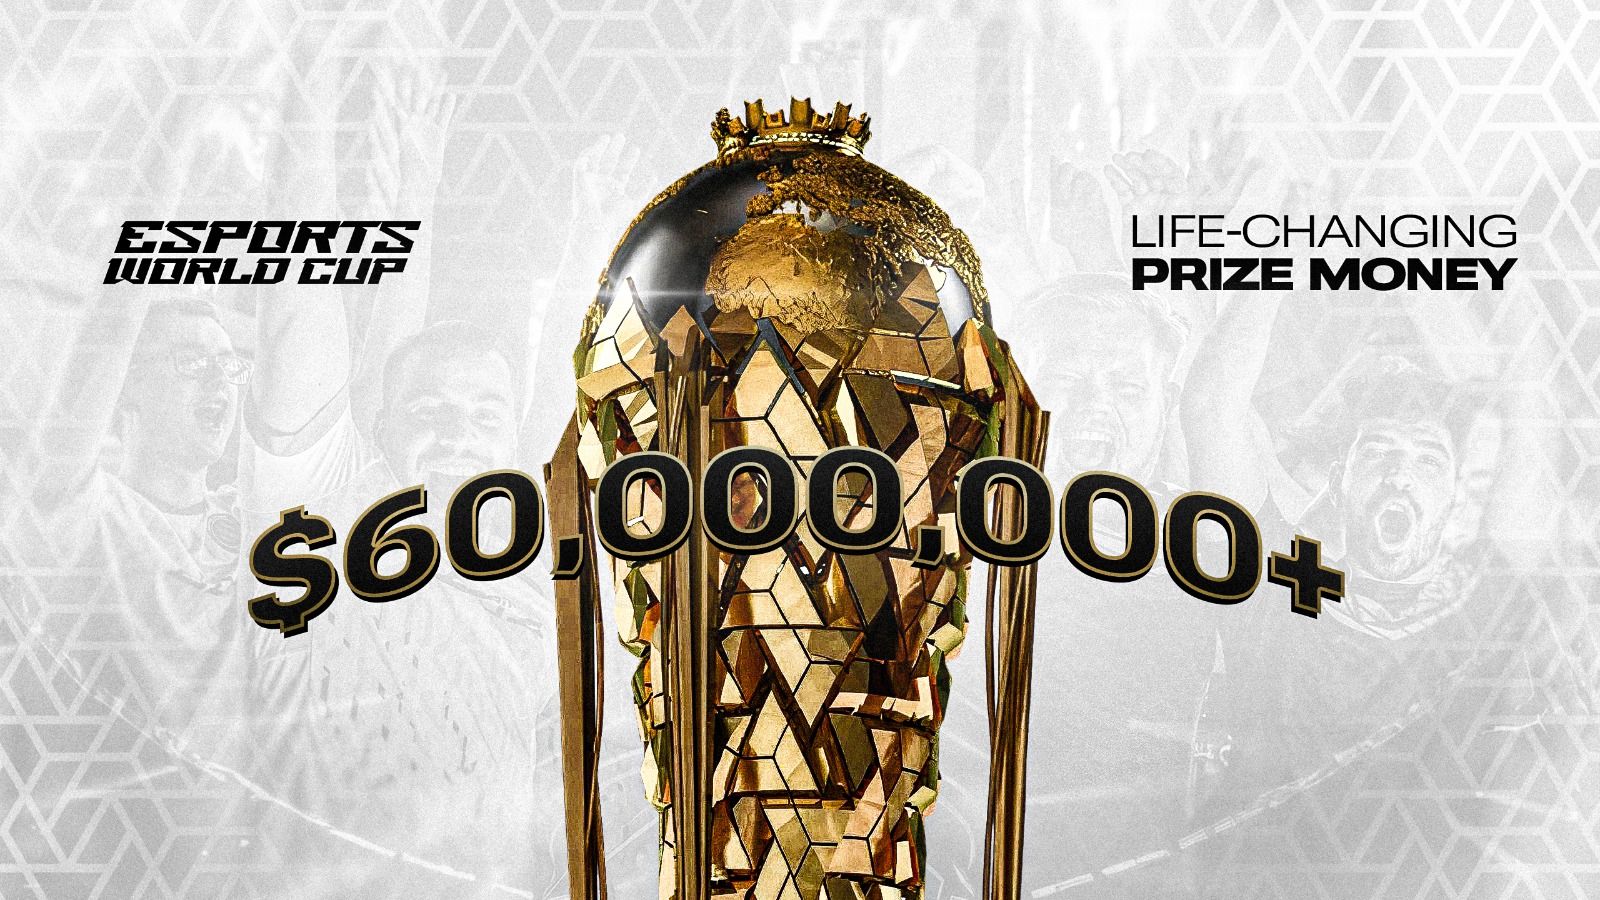 Esports World Cup Prize Pool Breakdown: Details of the Award Model